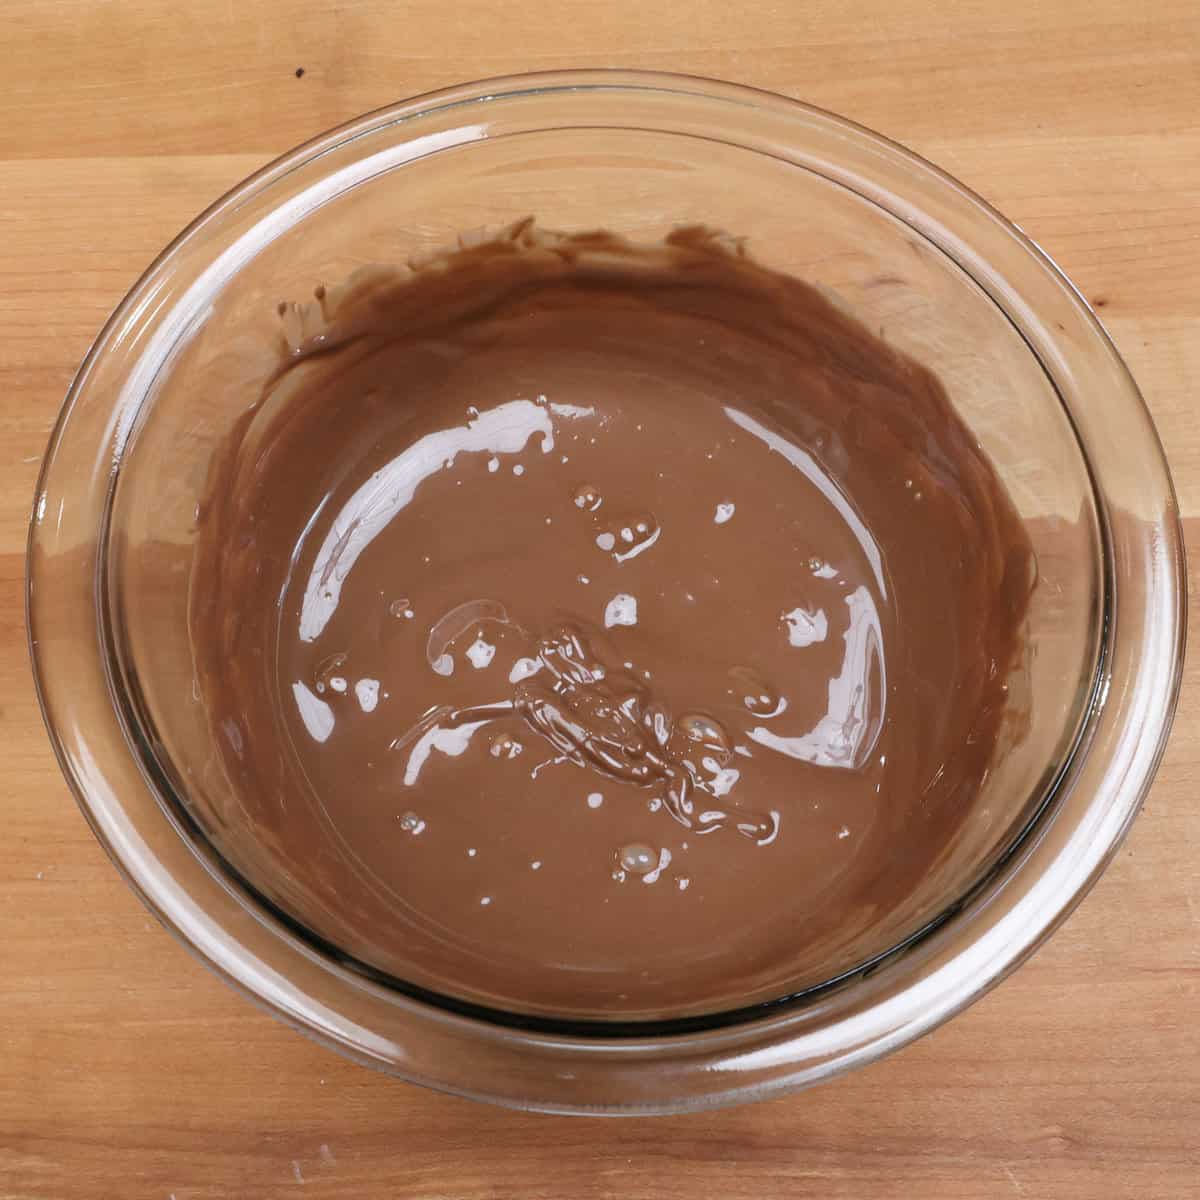 melted chocolate in a mixing bowl.